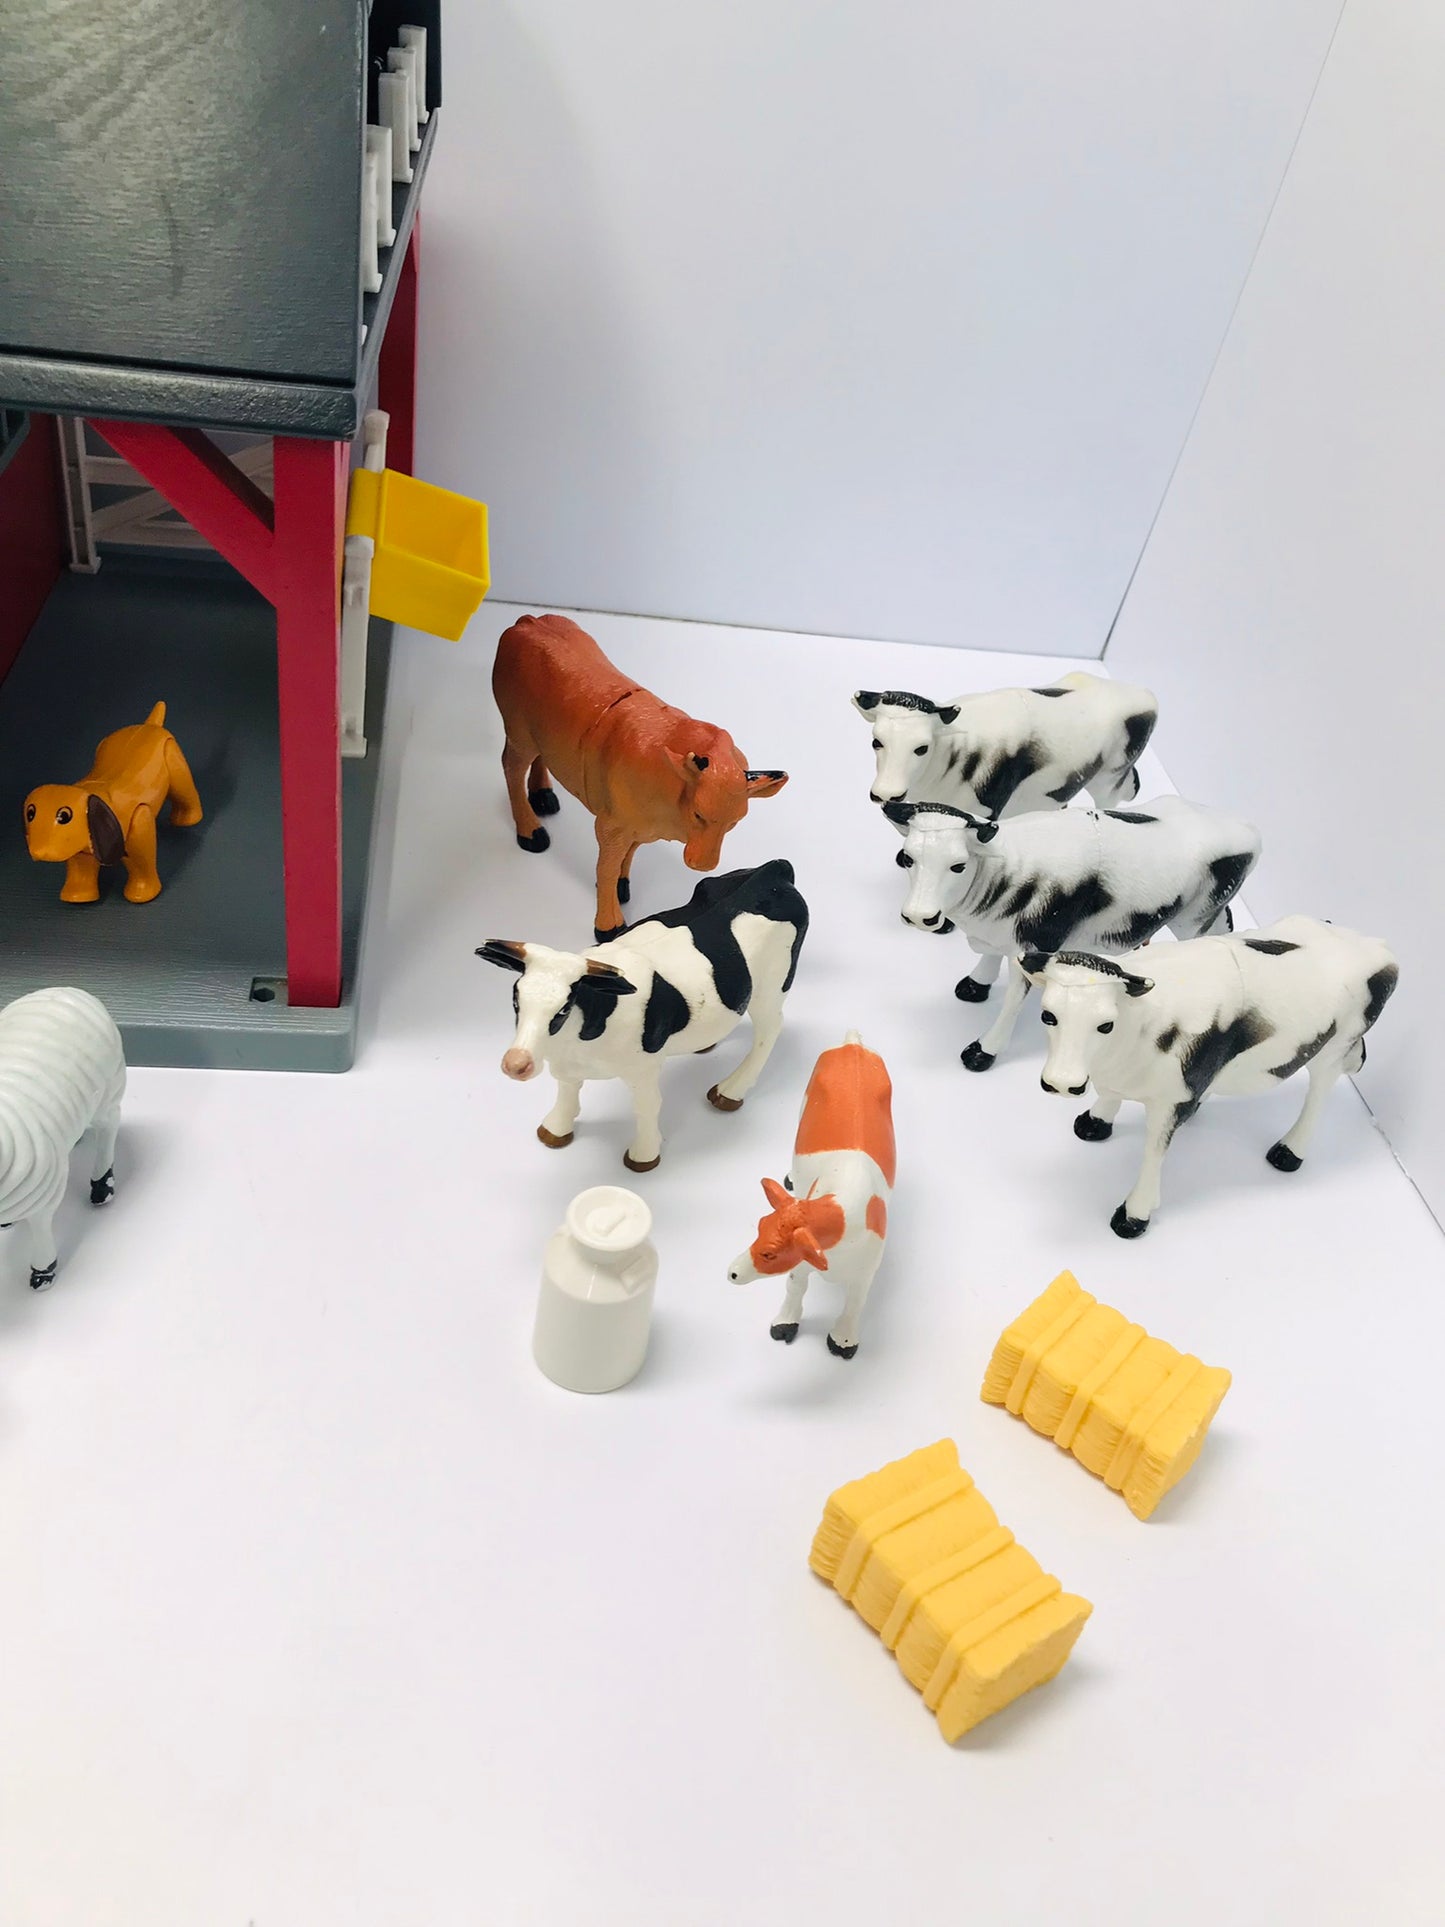 Terra Battat Play Family Farm Loaded With Animals And Accessories